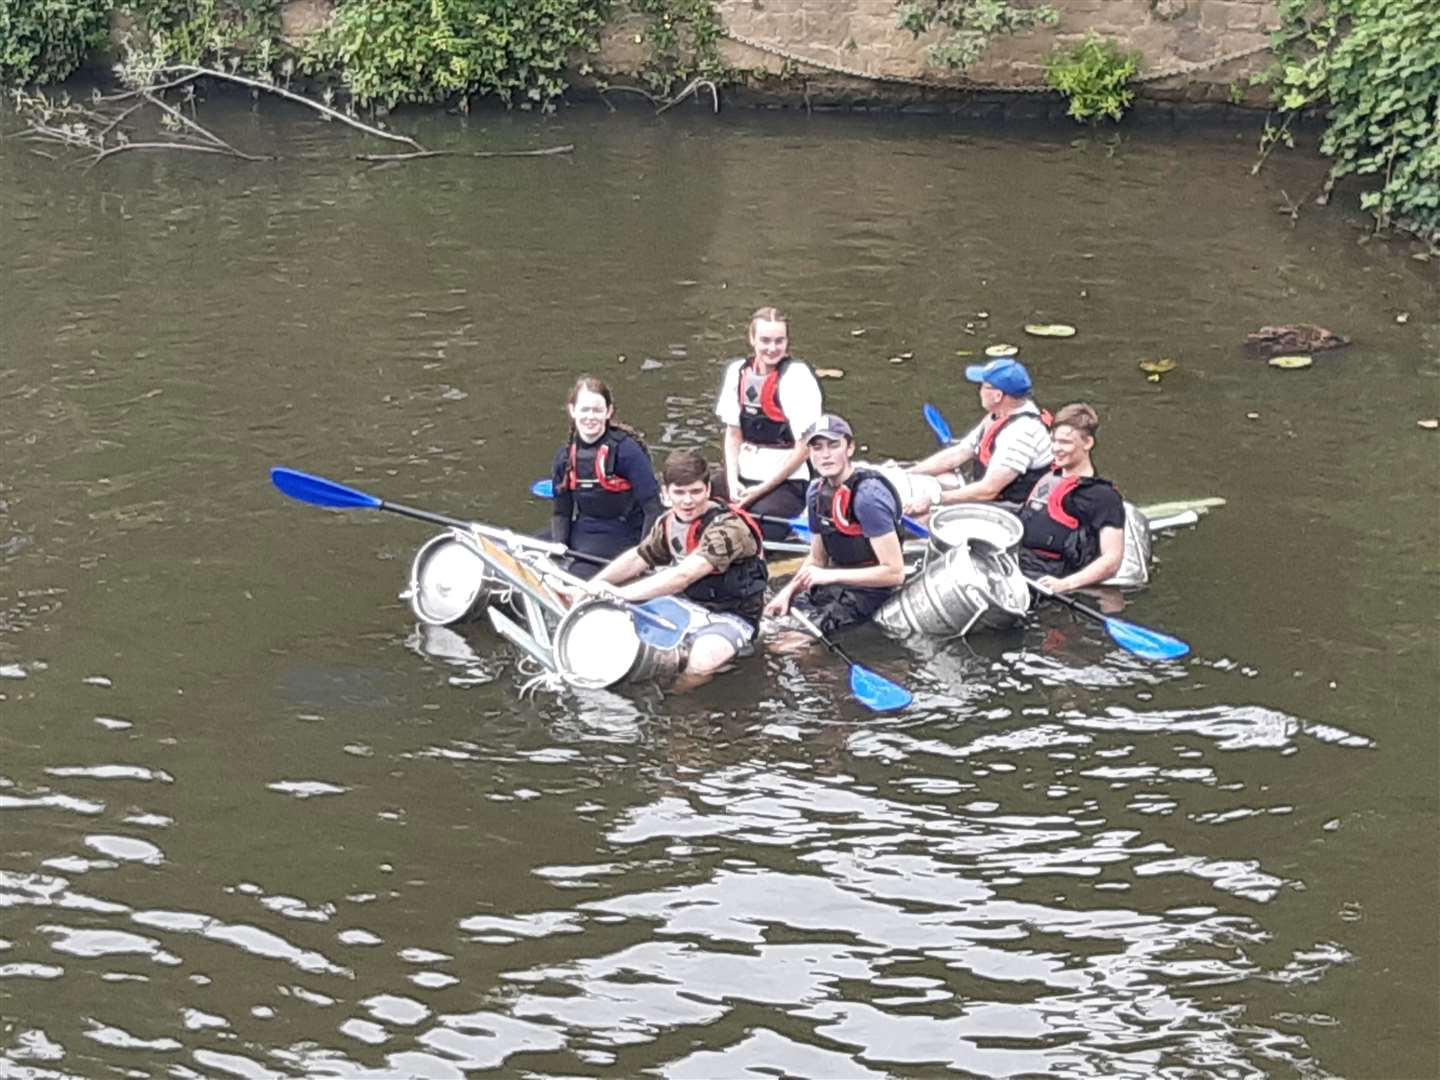 Some of the contestants in this year's raft race